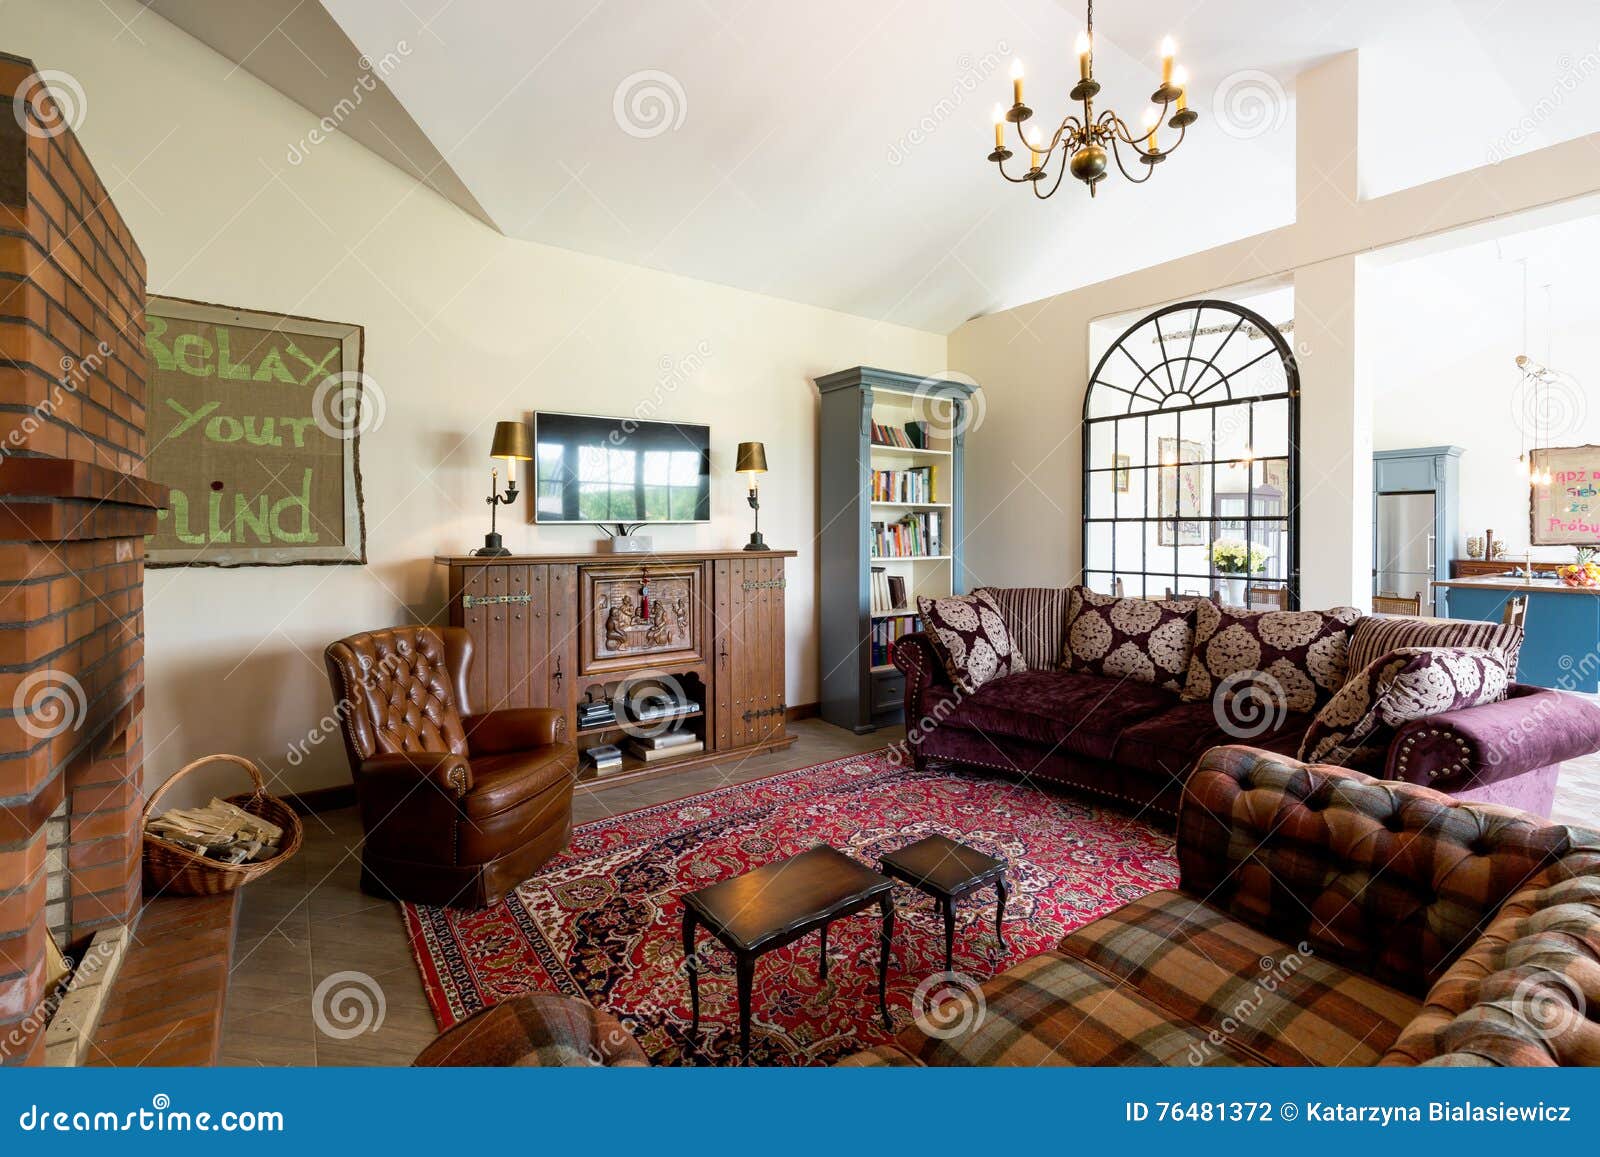 Living Room In Cattage Style Stock Photo Image Of Room Couch 76481372